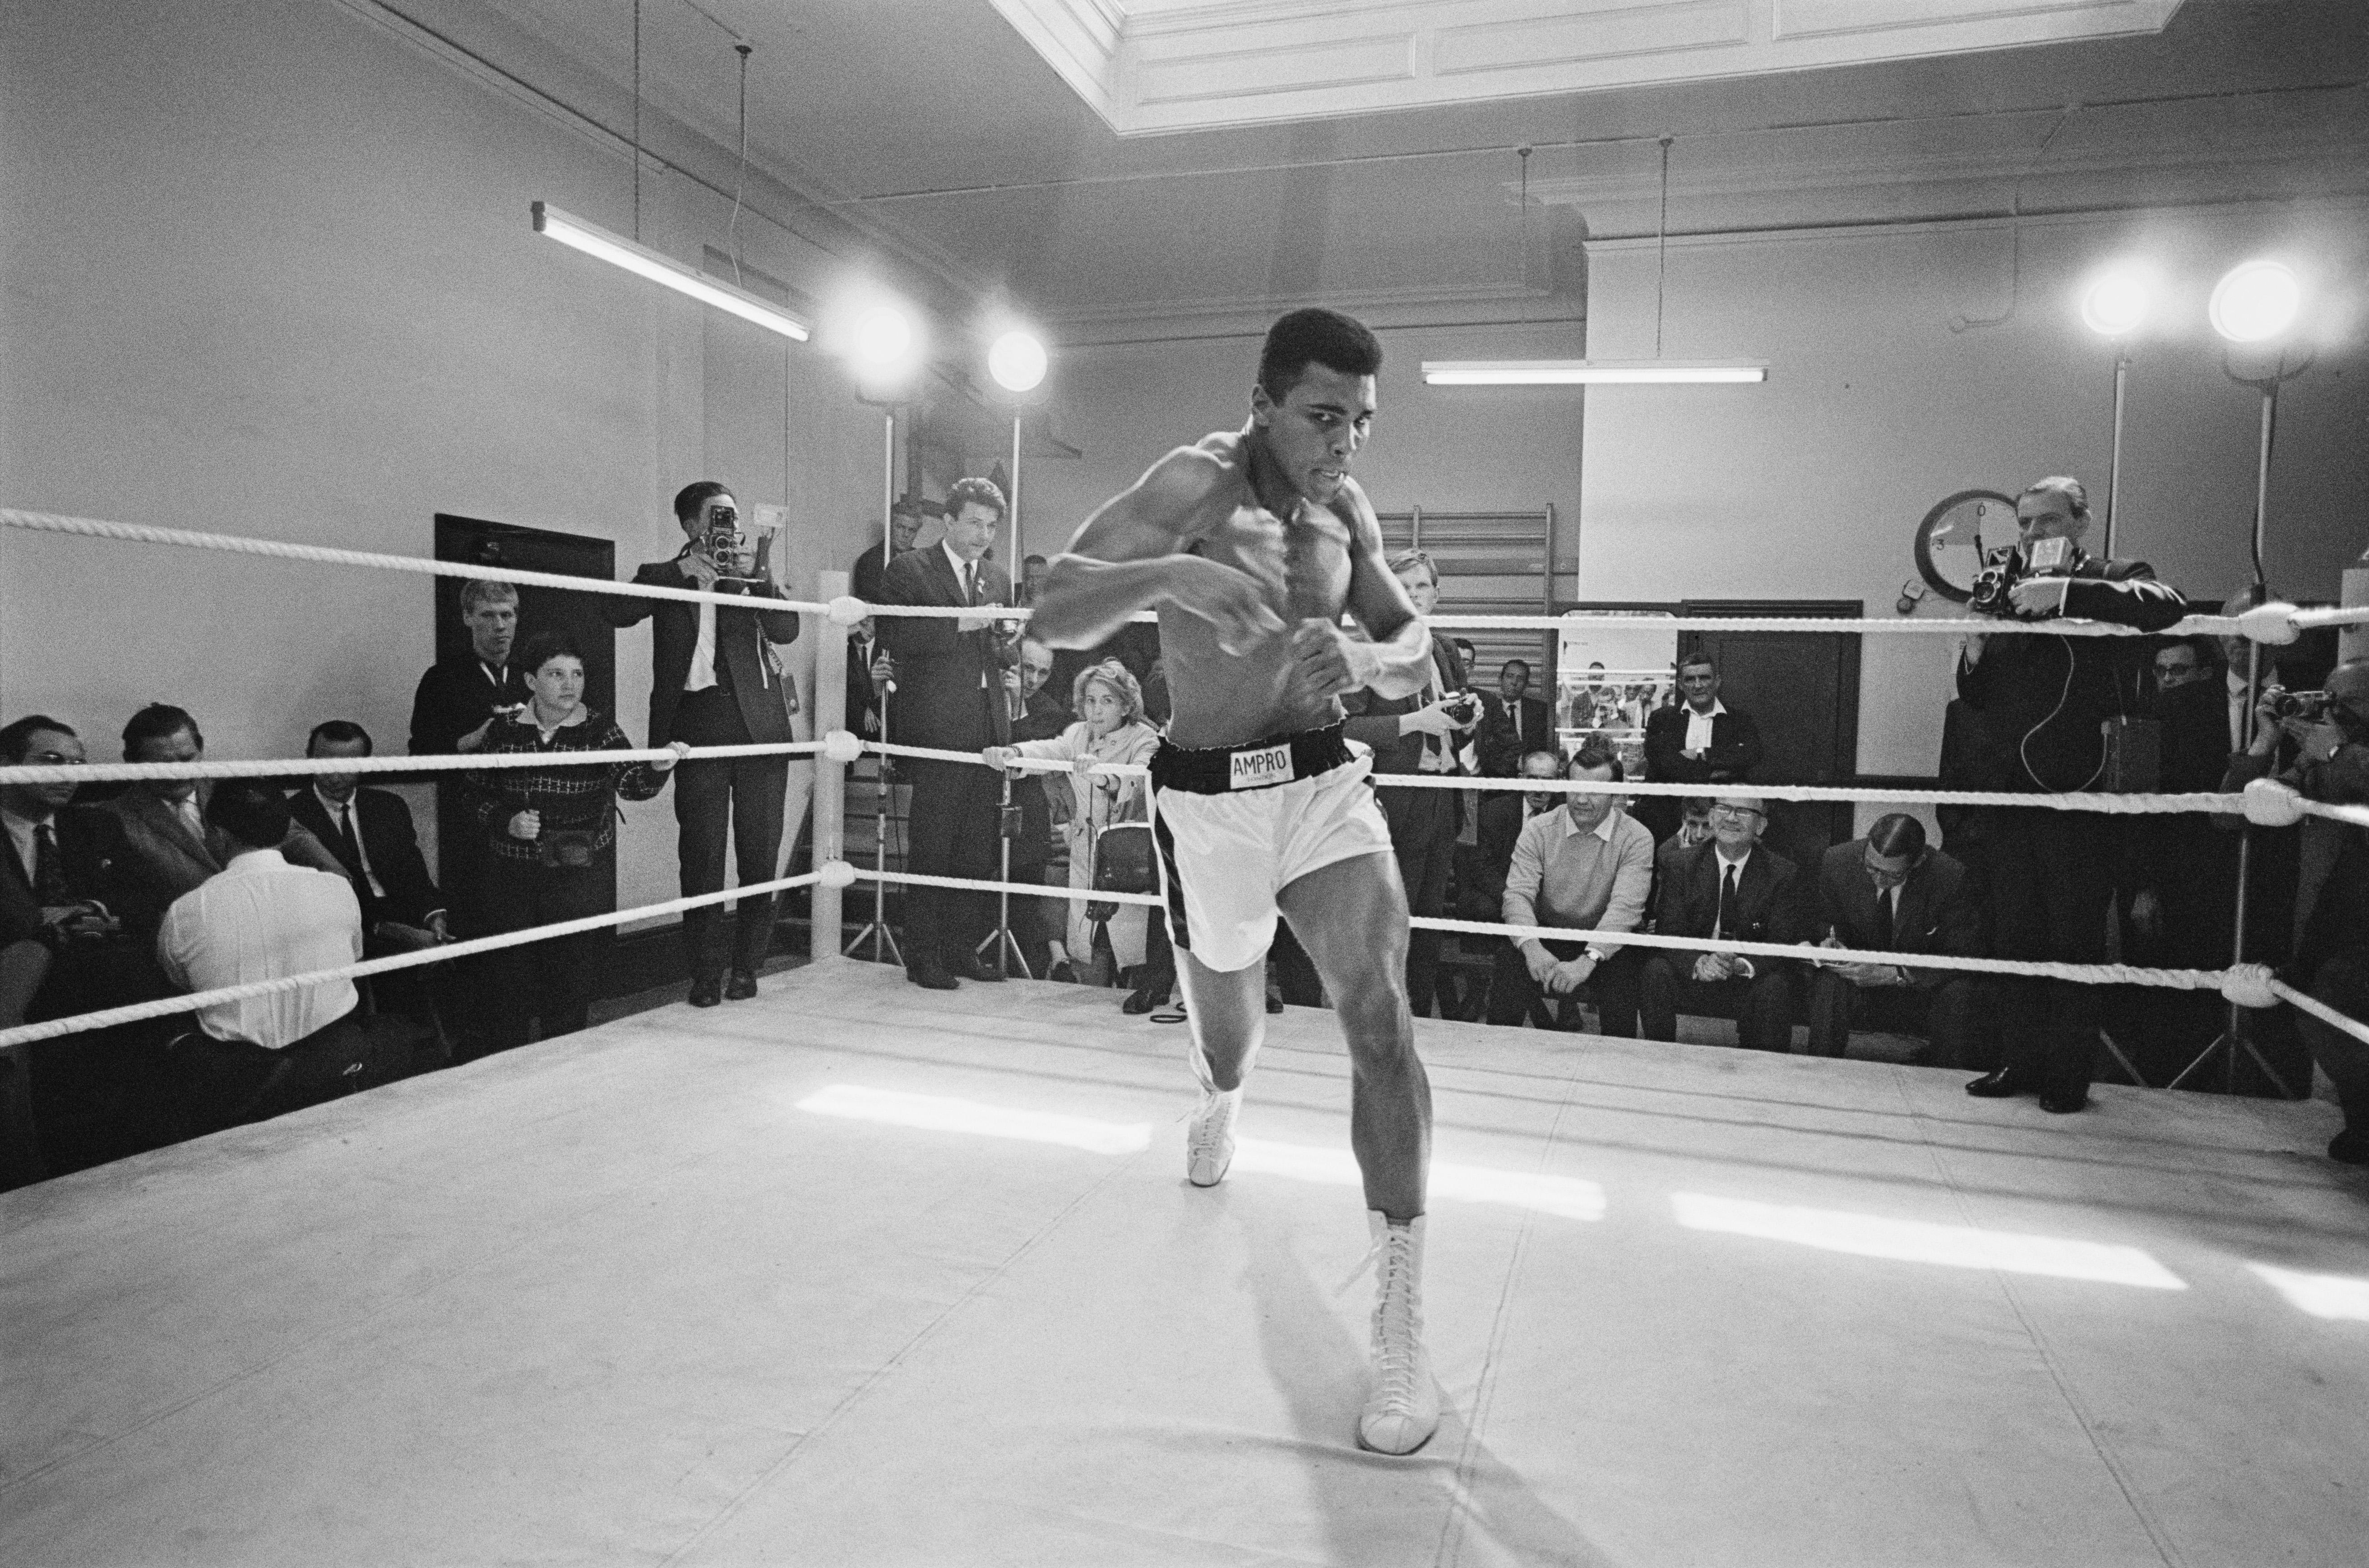 'Ali in Training' by R. McPhedran, Limited Edition Photographic Print, 30x40